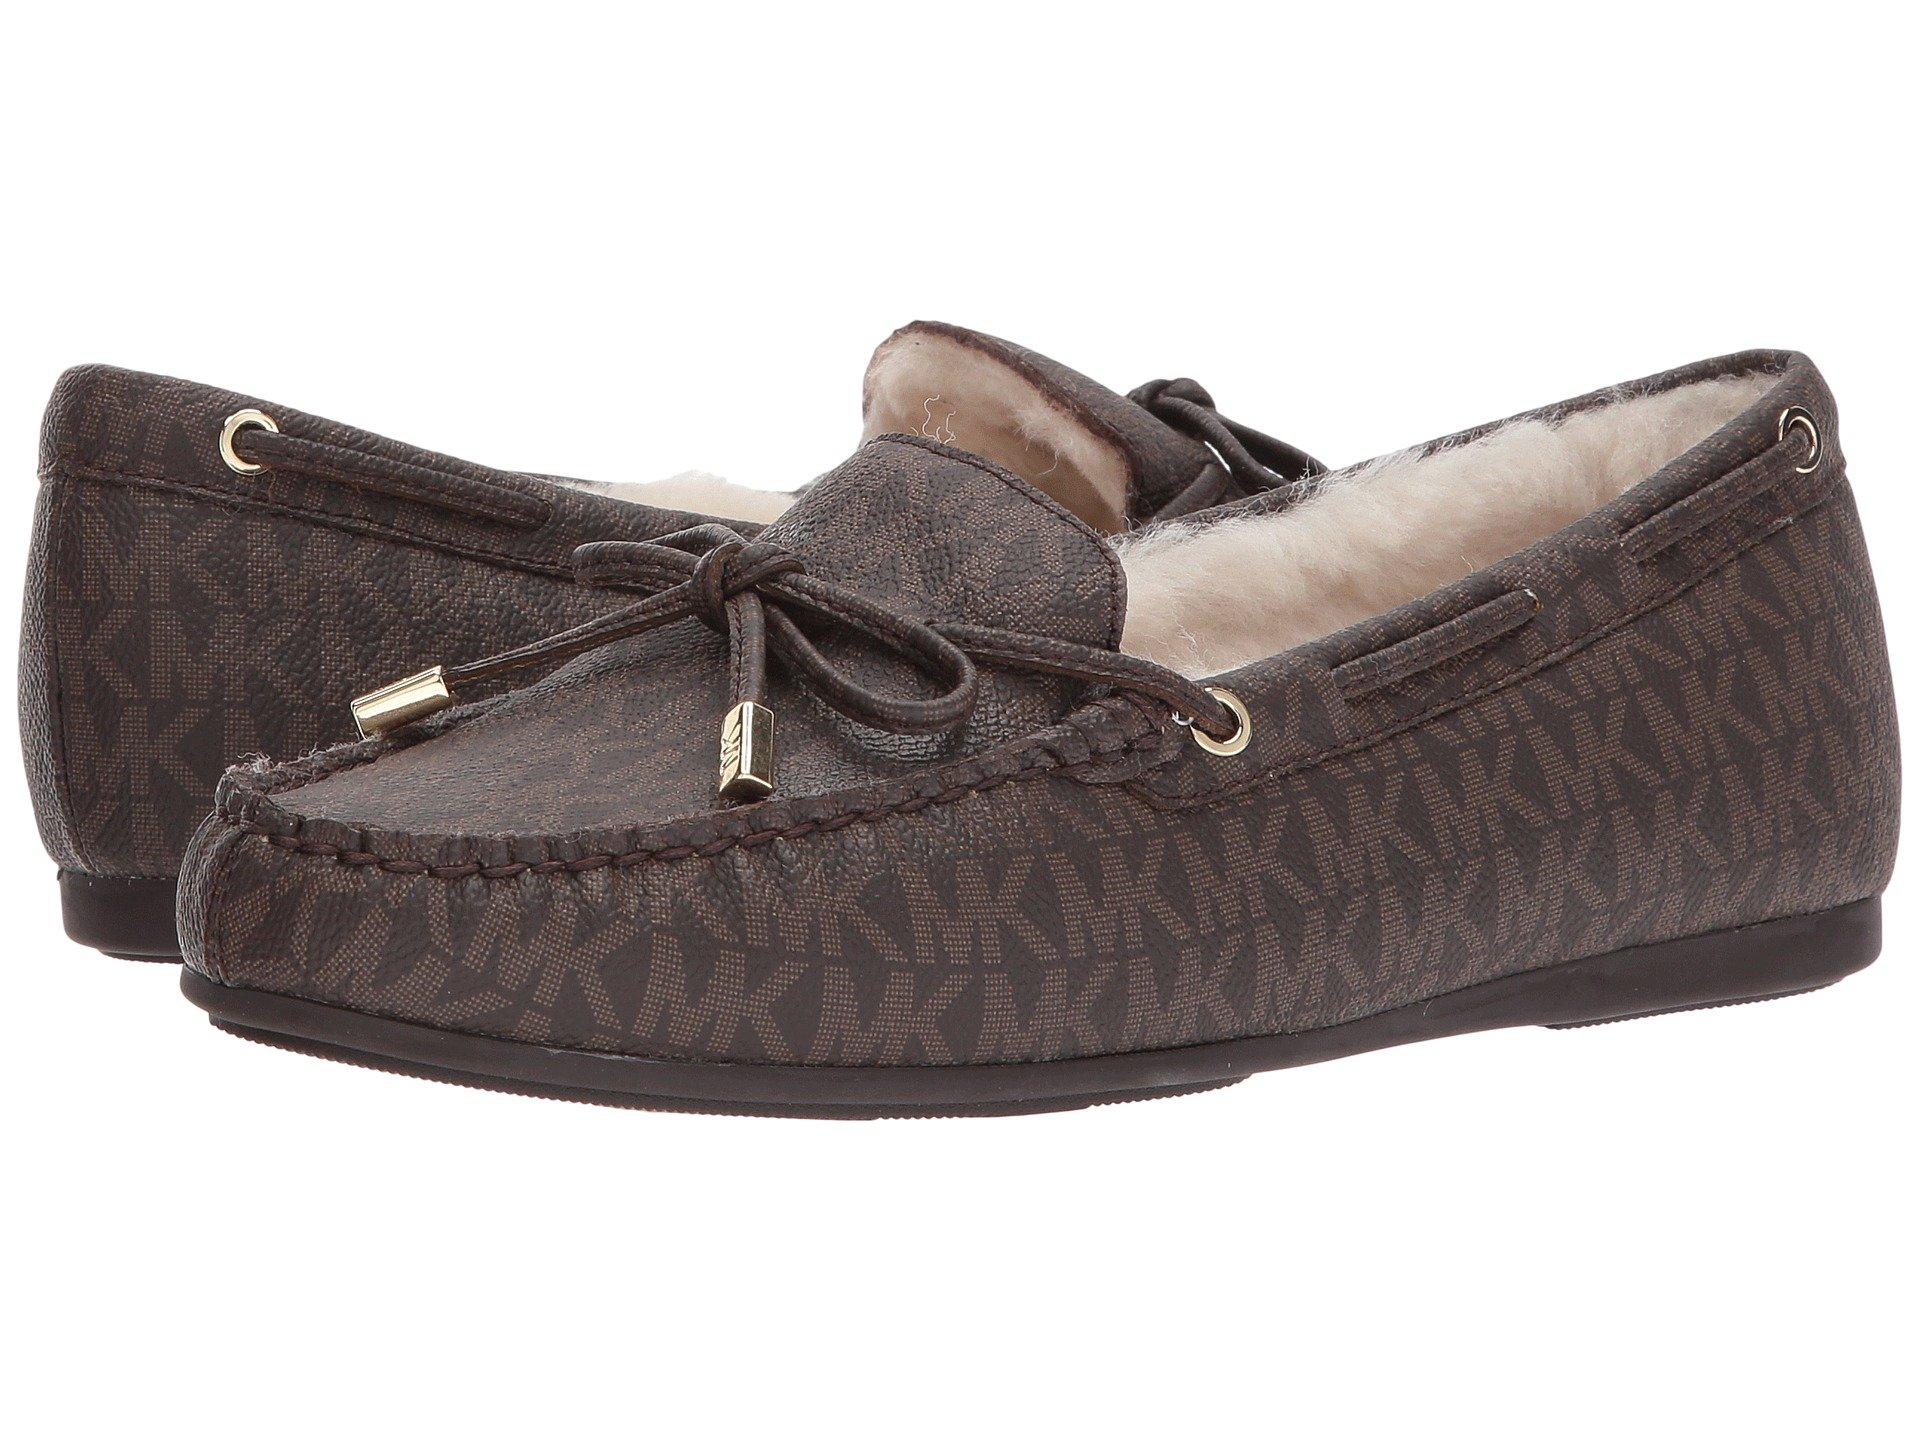 michael kors sutton shearling lined moccasins